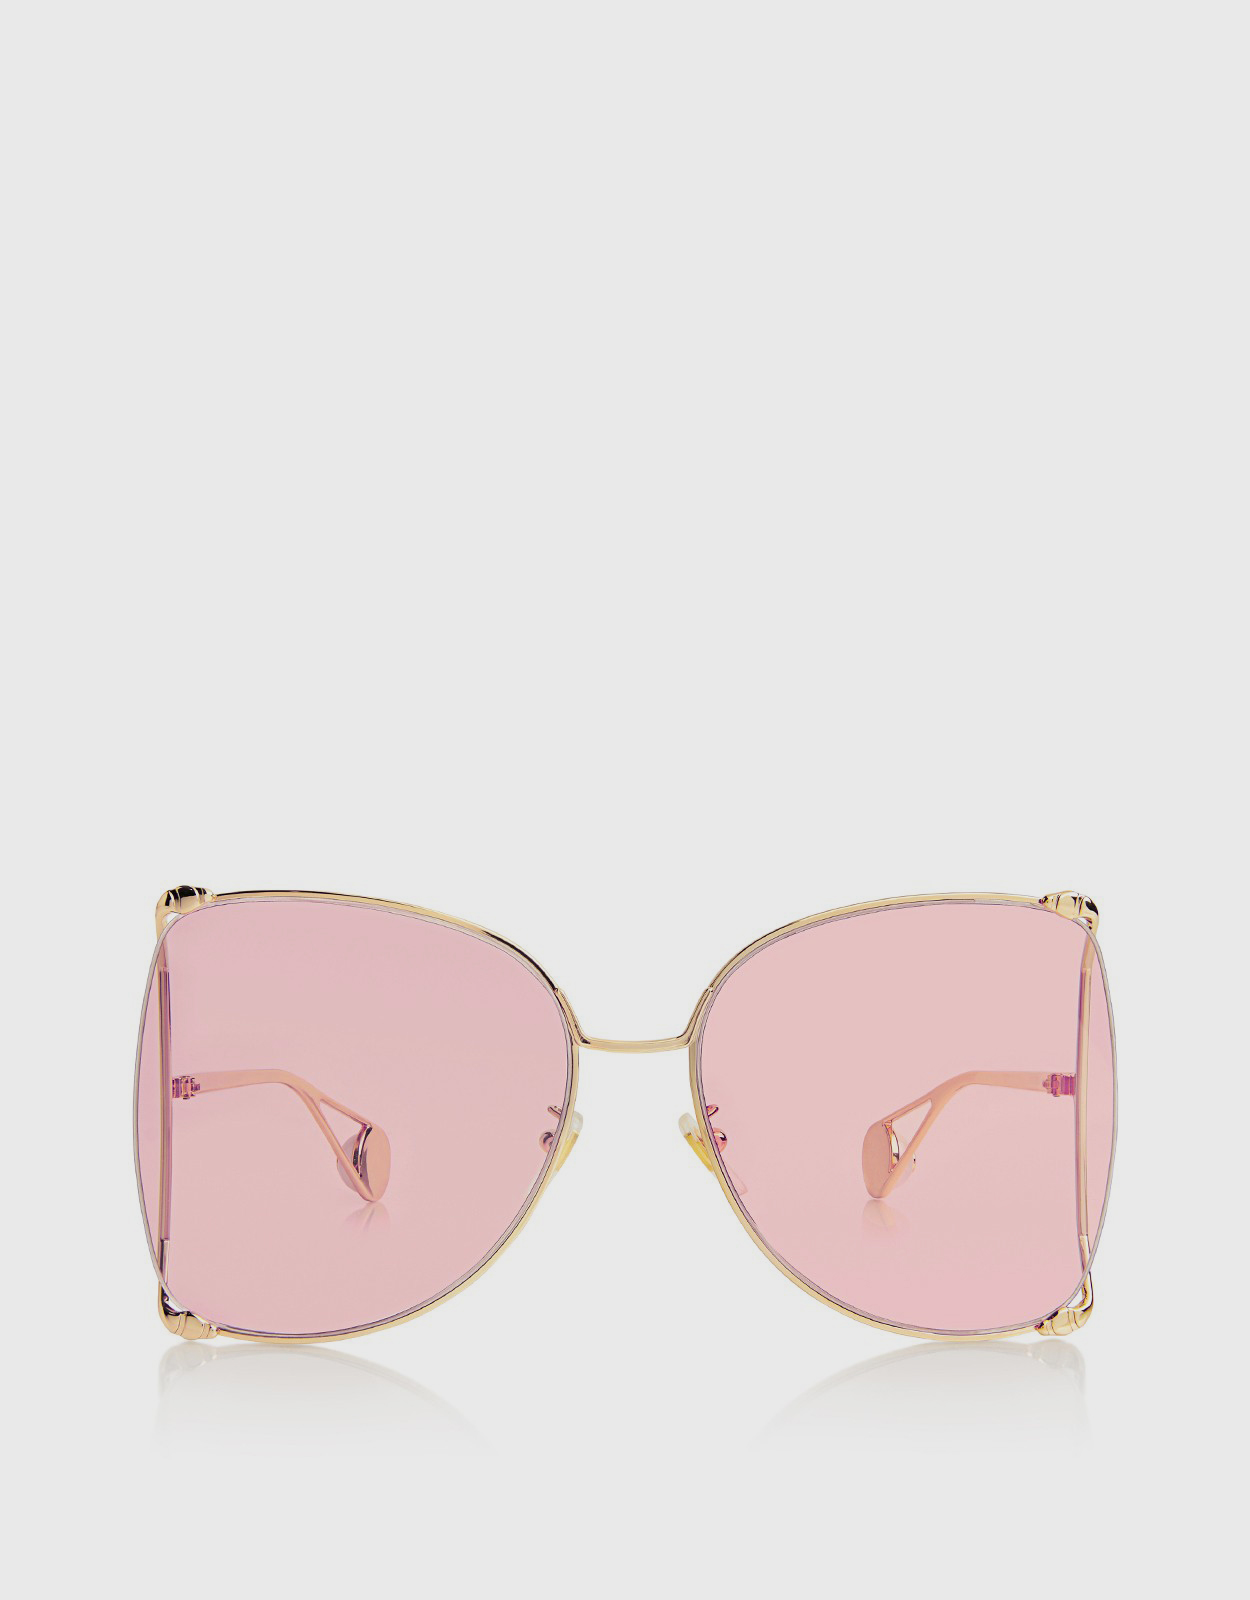 Gucci Oversized Butterfly Shape Squred Sunglasses (Sunglasses,Square Frame)  